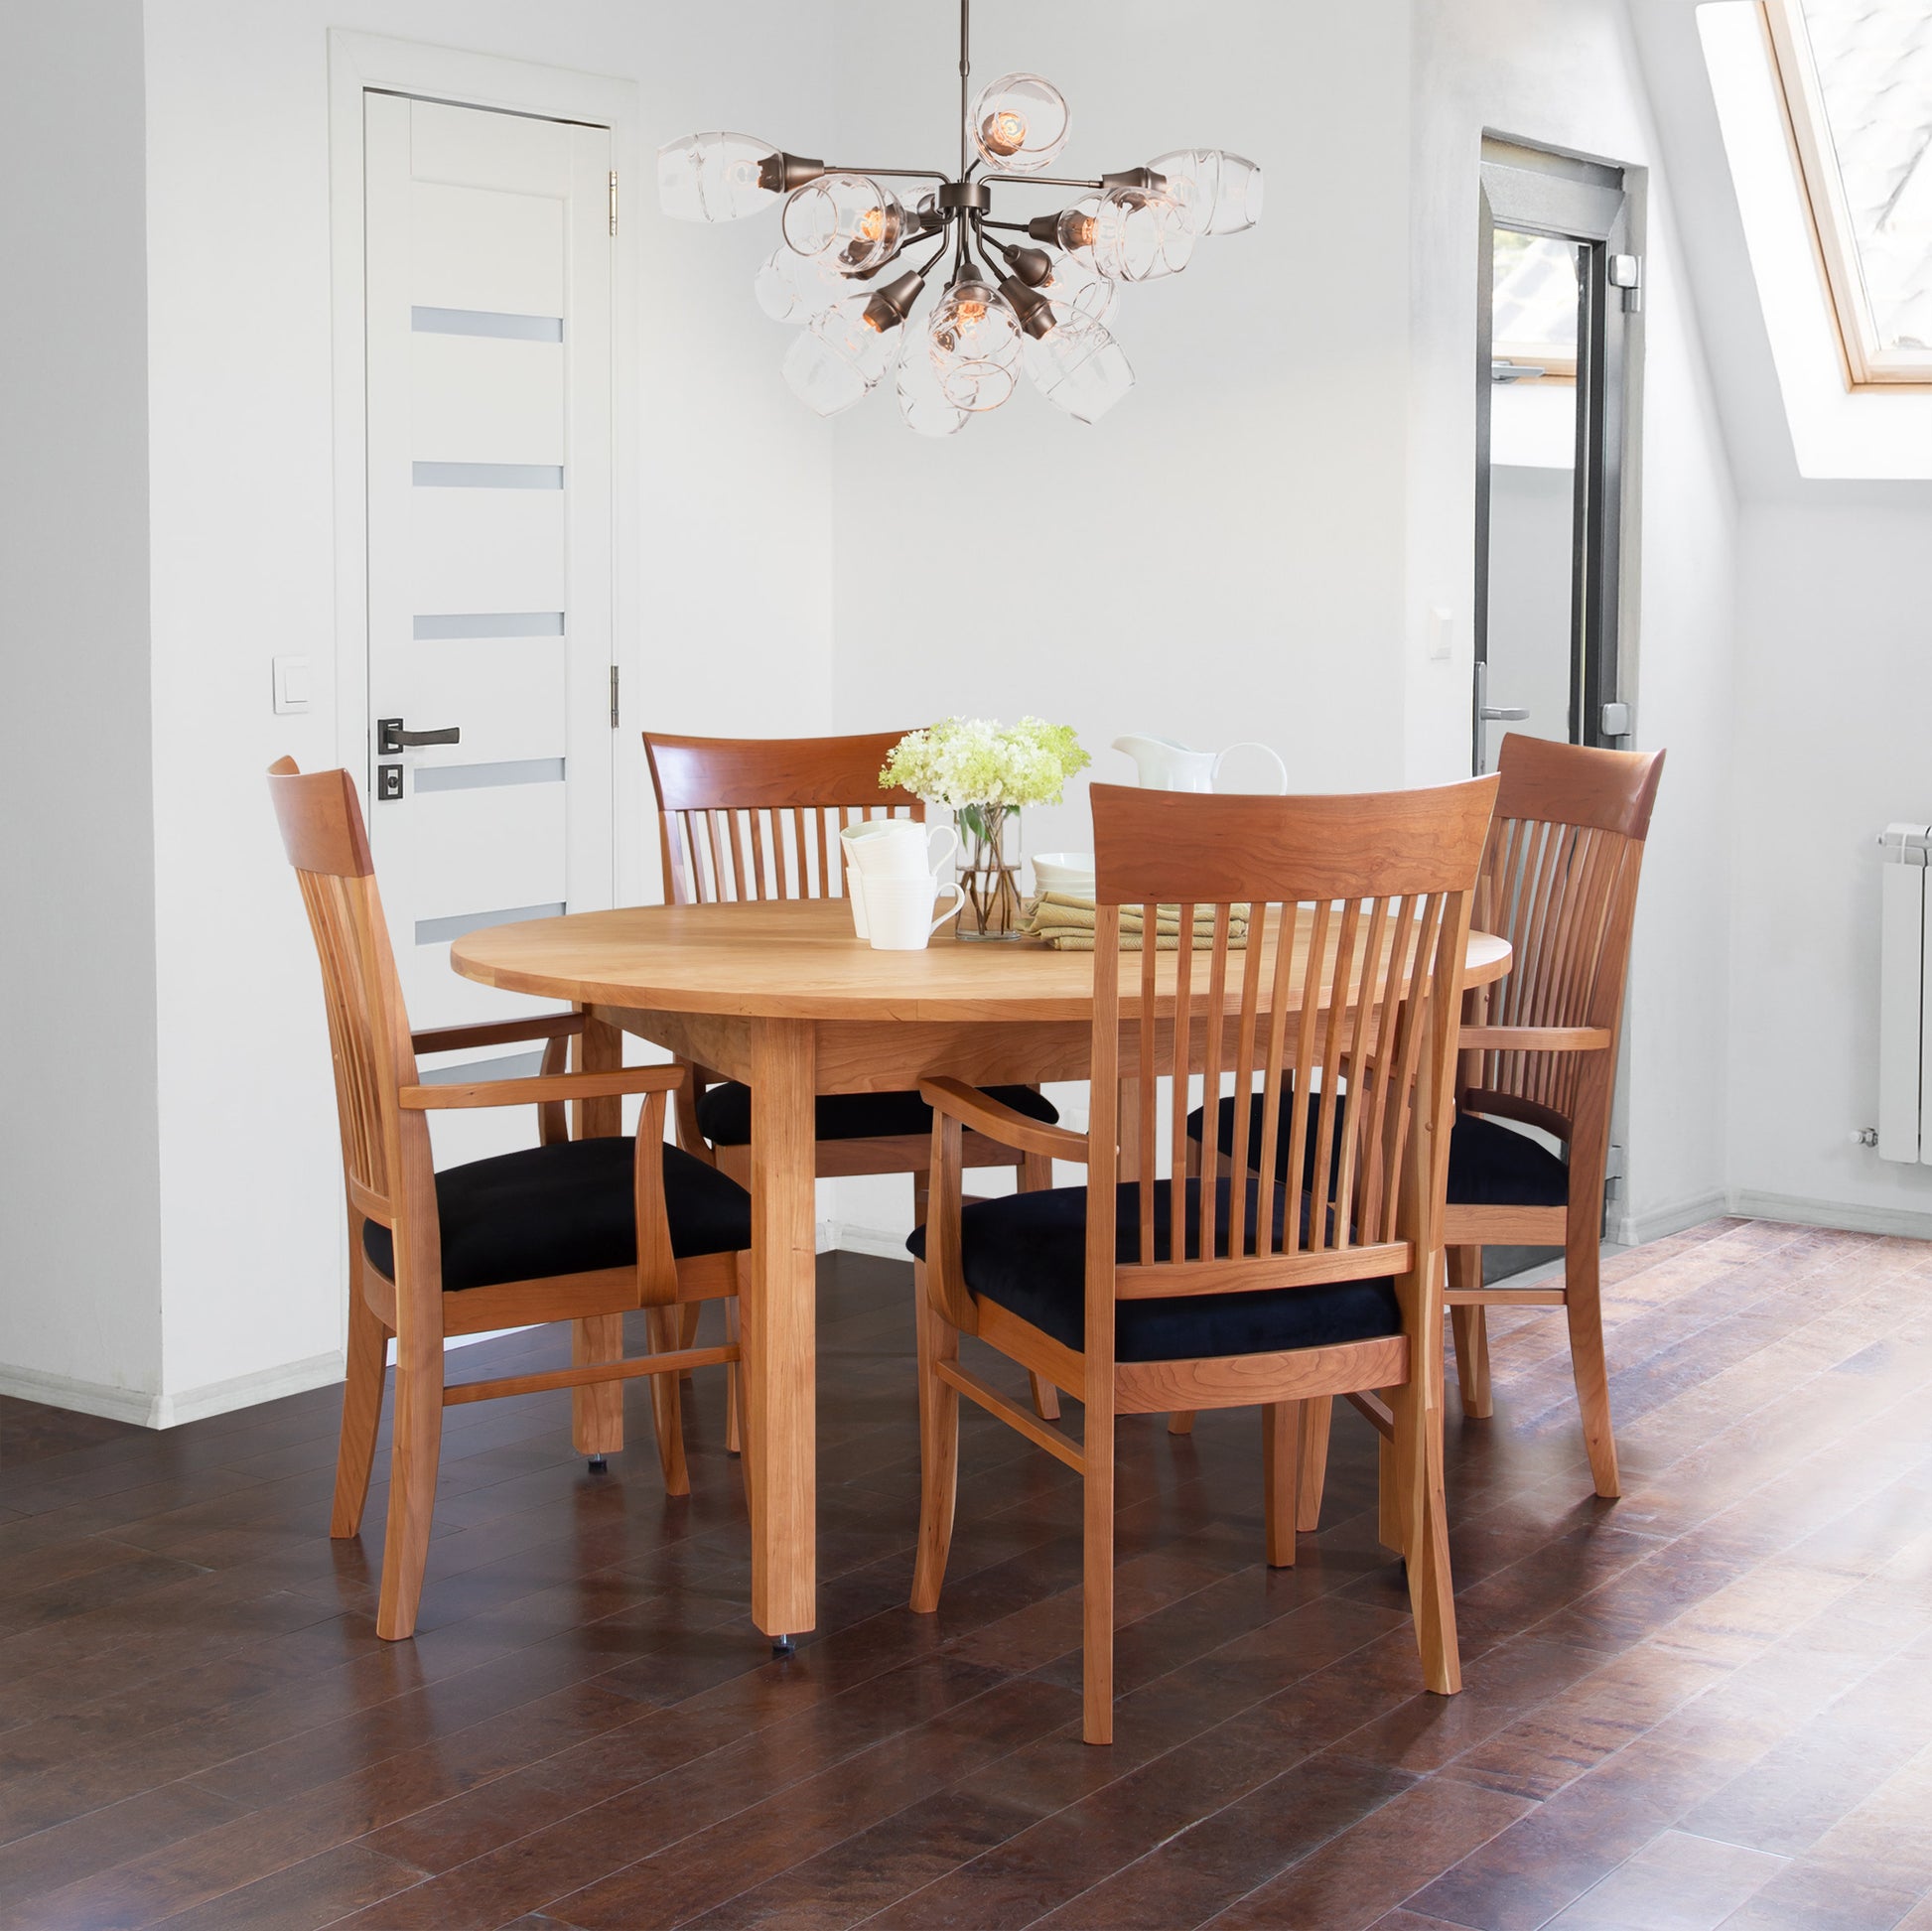 A modern dining room featuring a wooden table with six Vermont Woods Studios Contemporary Shaker chairs, a decorative ceiling light, wood flooring, and a skylight, lit by natural sunlight.